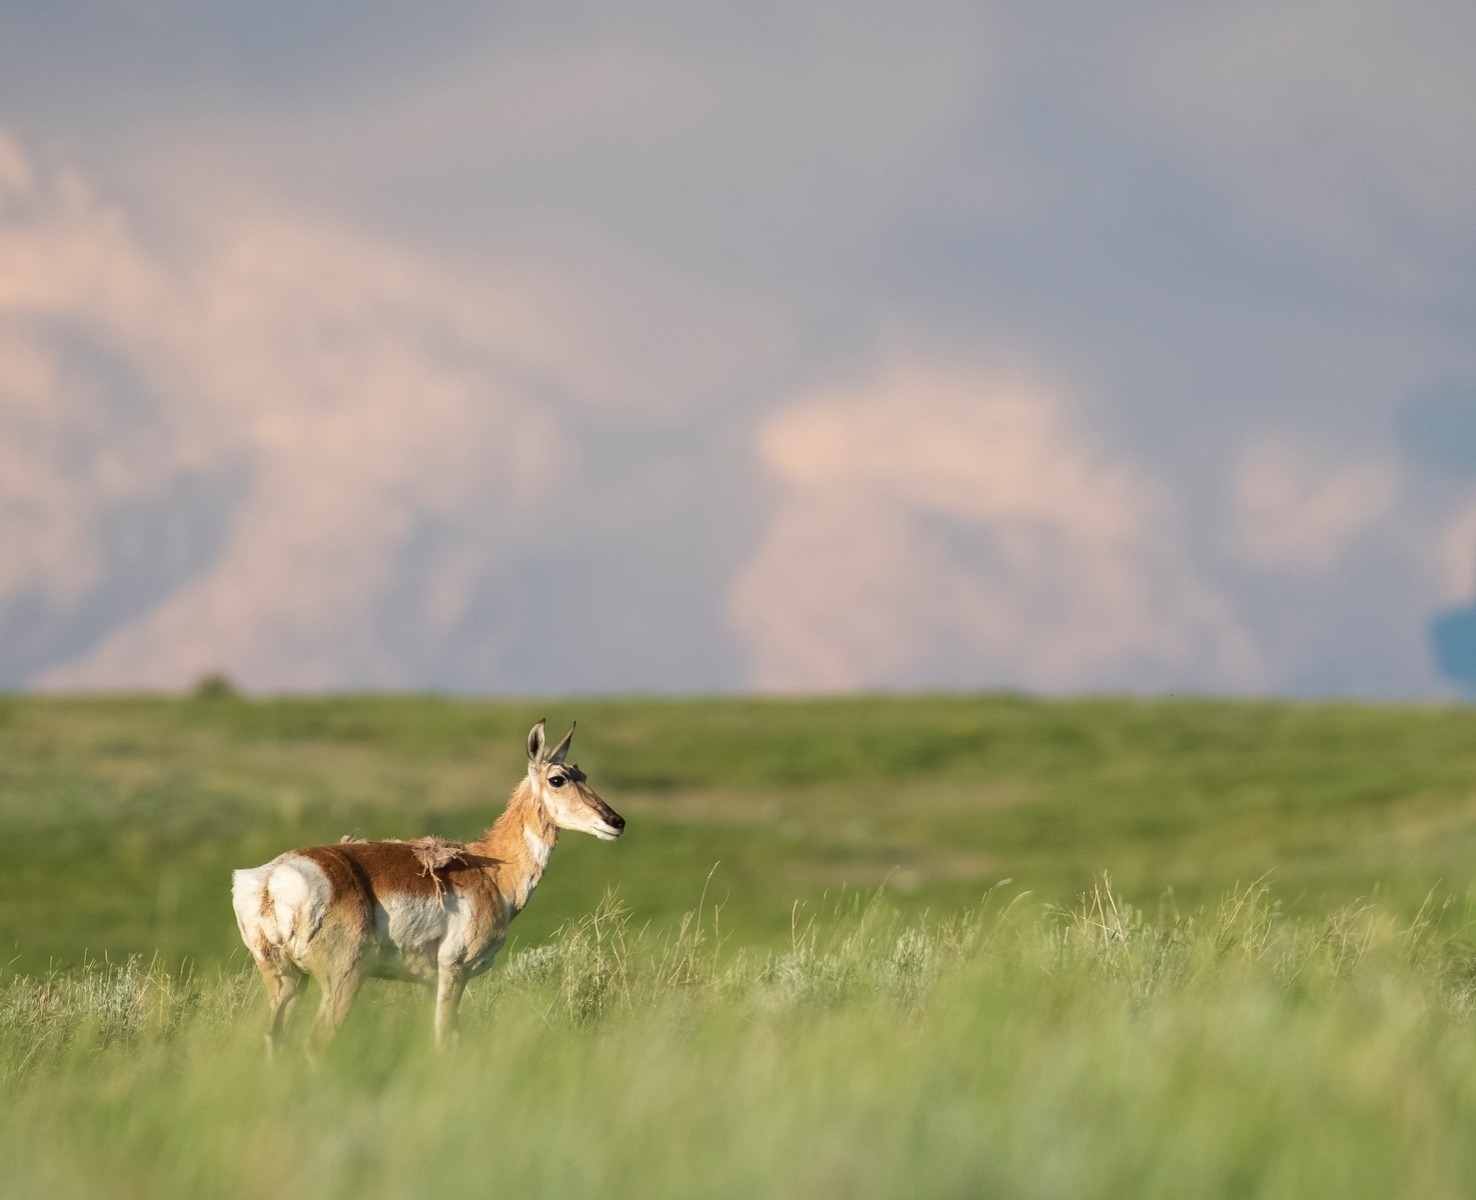 Home, home on the range: pronghorn are among the habitat beneficiaries  found on the American Prairie Reserve. APR is dedicated to restoring and rewilding what was once one of the most biologically rich ecosystems in the West.  Photo courtesy American Prairie Reserve.